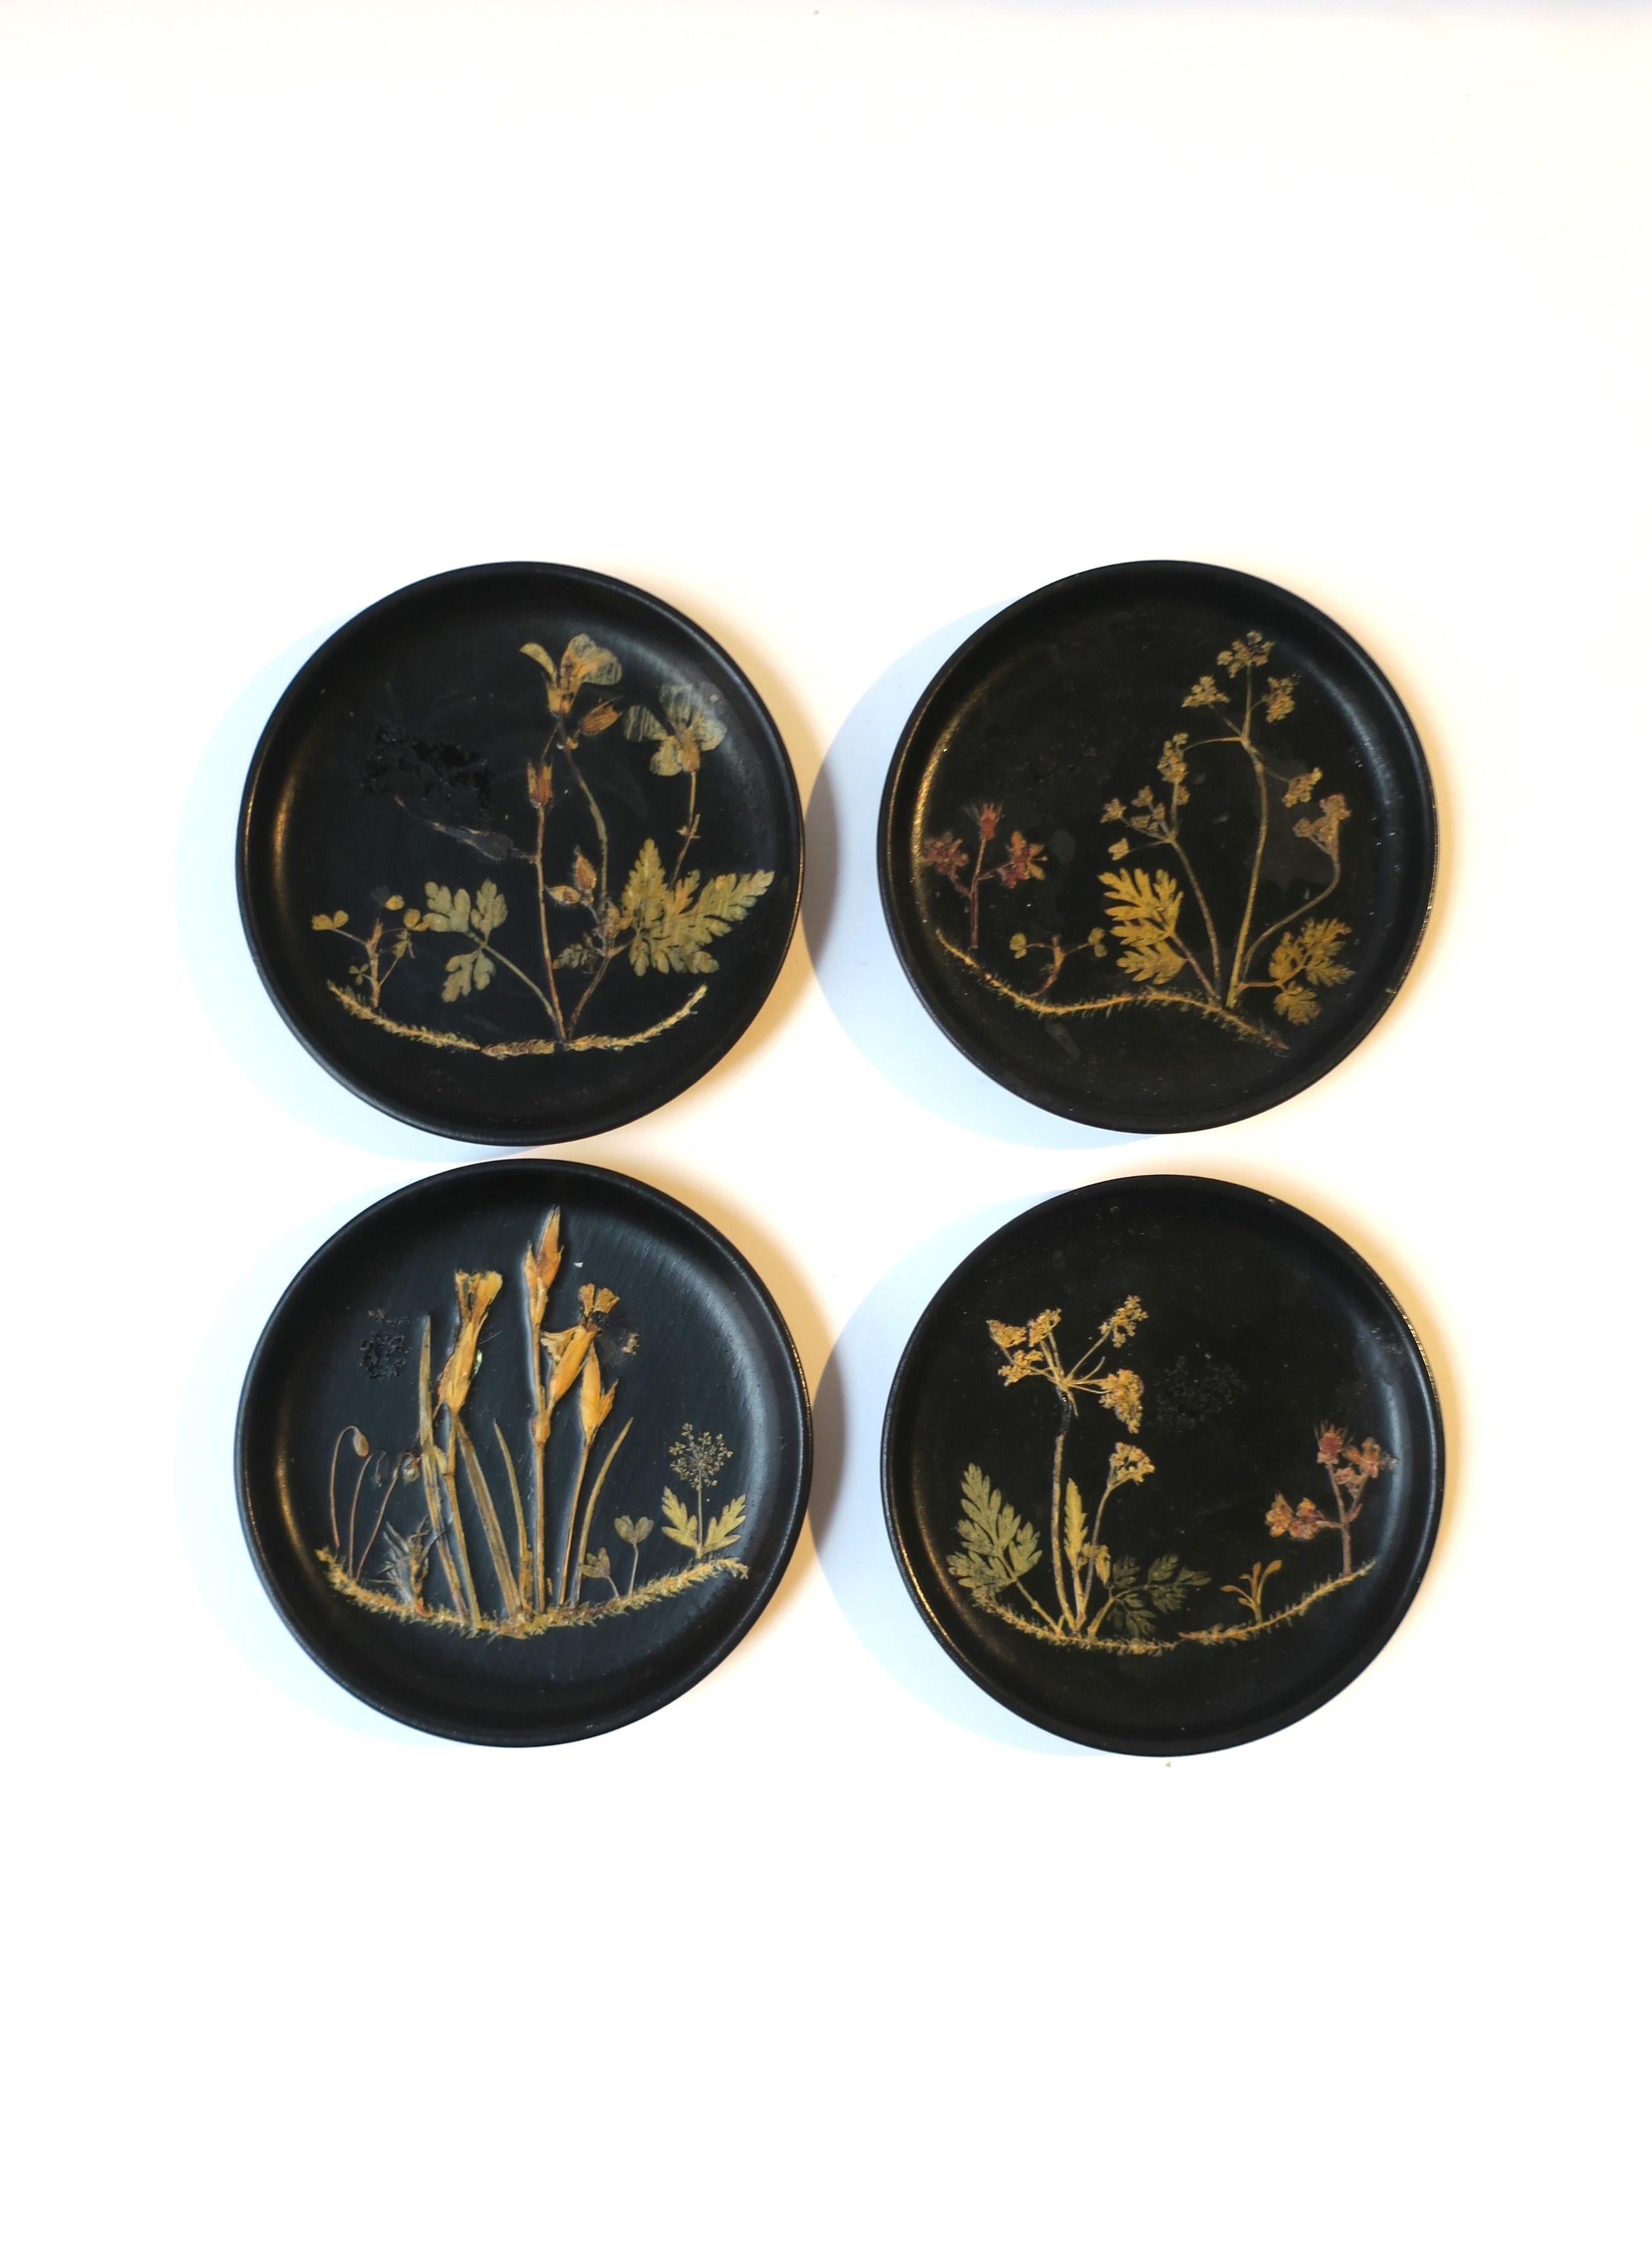 A set of four (4) Danish black wood ebonized cocktail drinks coasters with dried organic botanical design, Midcentury Modern Scandinavian Modern design, circa early to mid-20th century, Denmark. Marked on underside 'Made in Denmark', as shown in